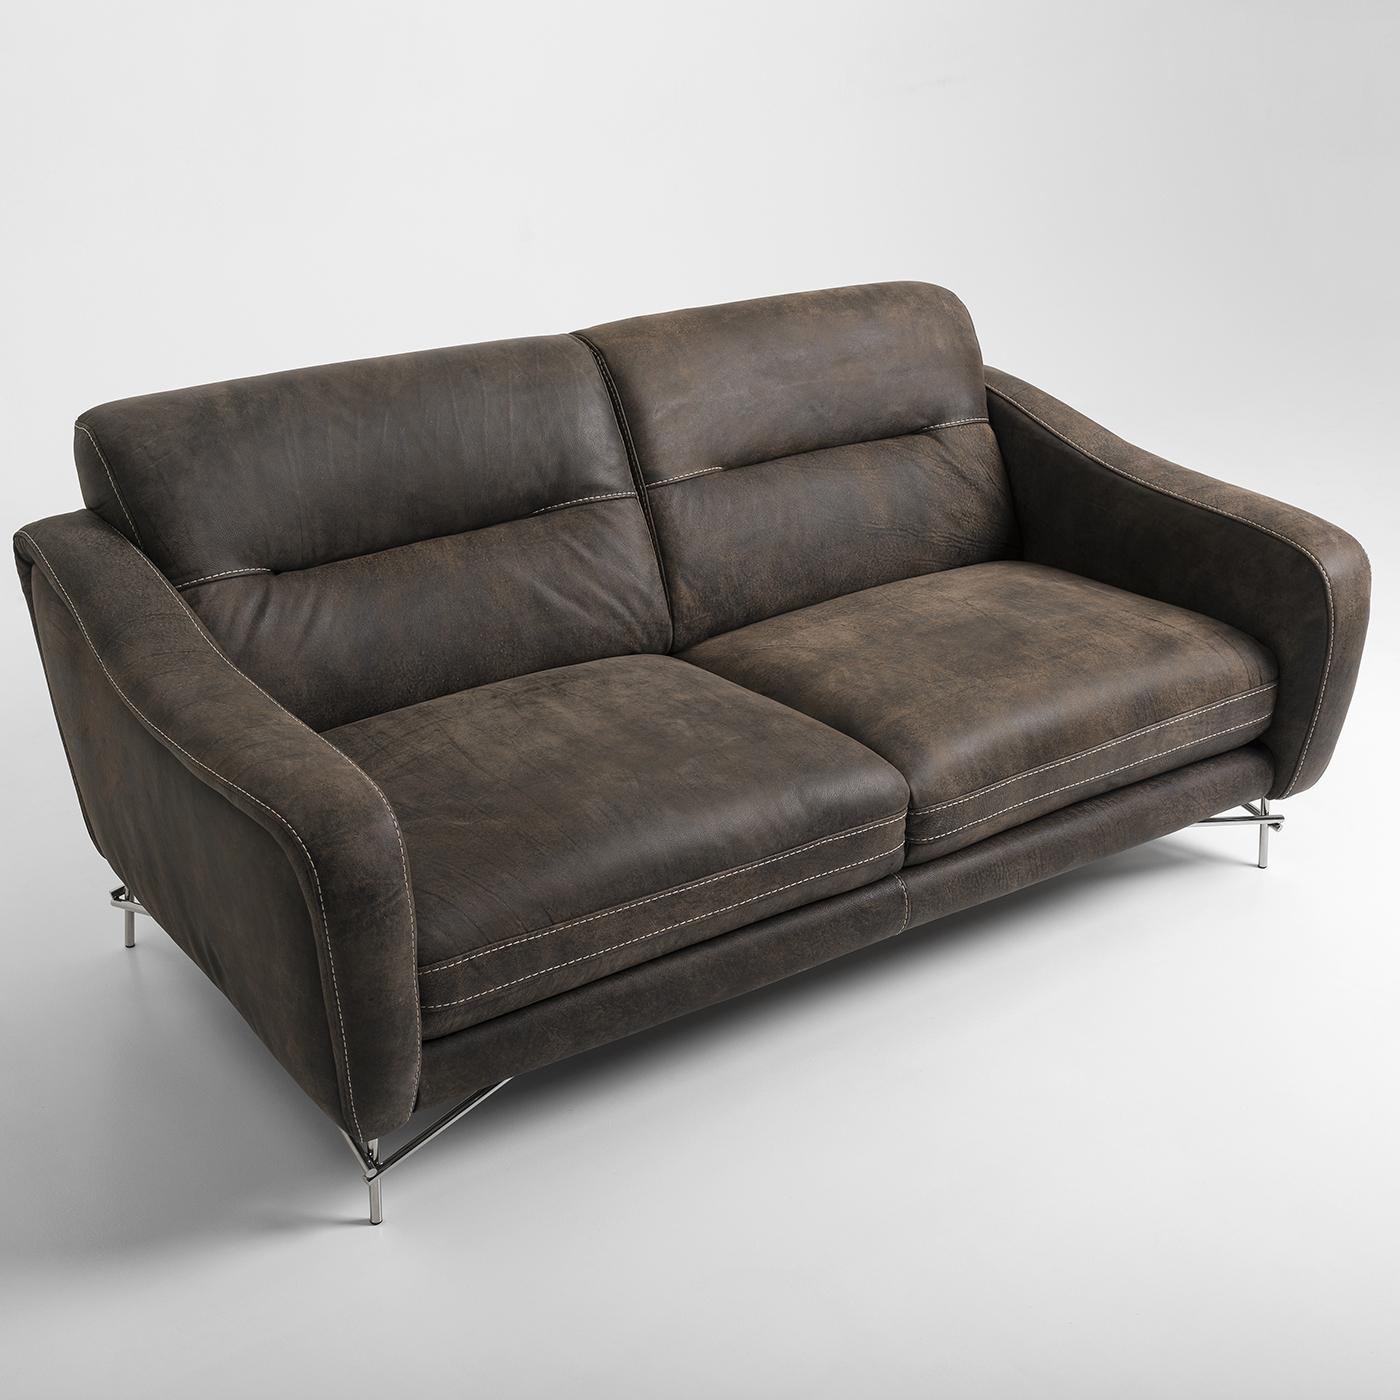 The Fonzie 2-seat sofa fuses style with comfort, boasting a modern interpretation of a Classic 1960s style. Crafted from smooth brown leather, this sofa boasts a distressed look for a subtle vintage allure. Intricate contrast stitching highlights